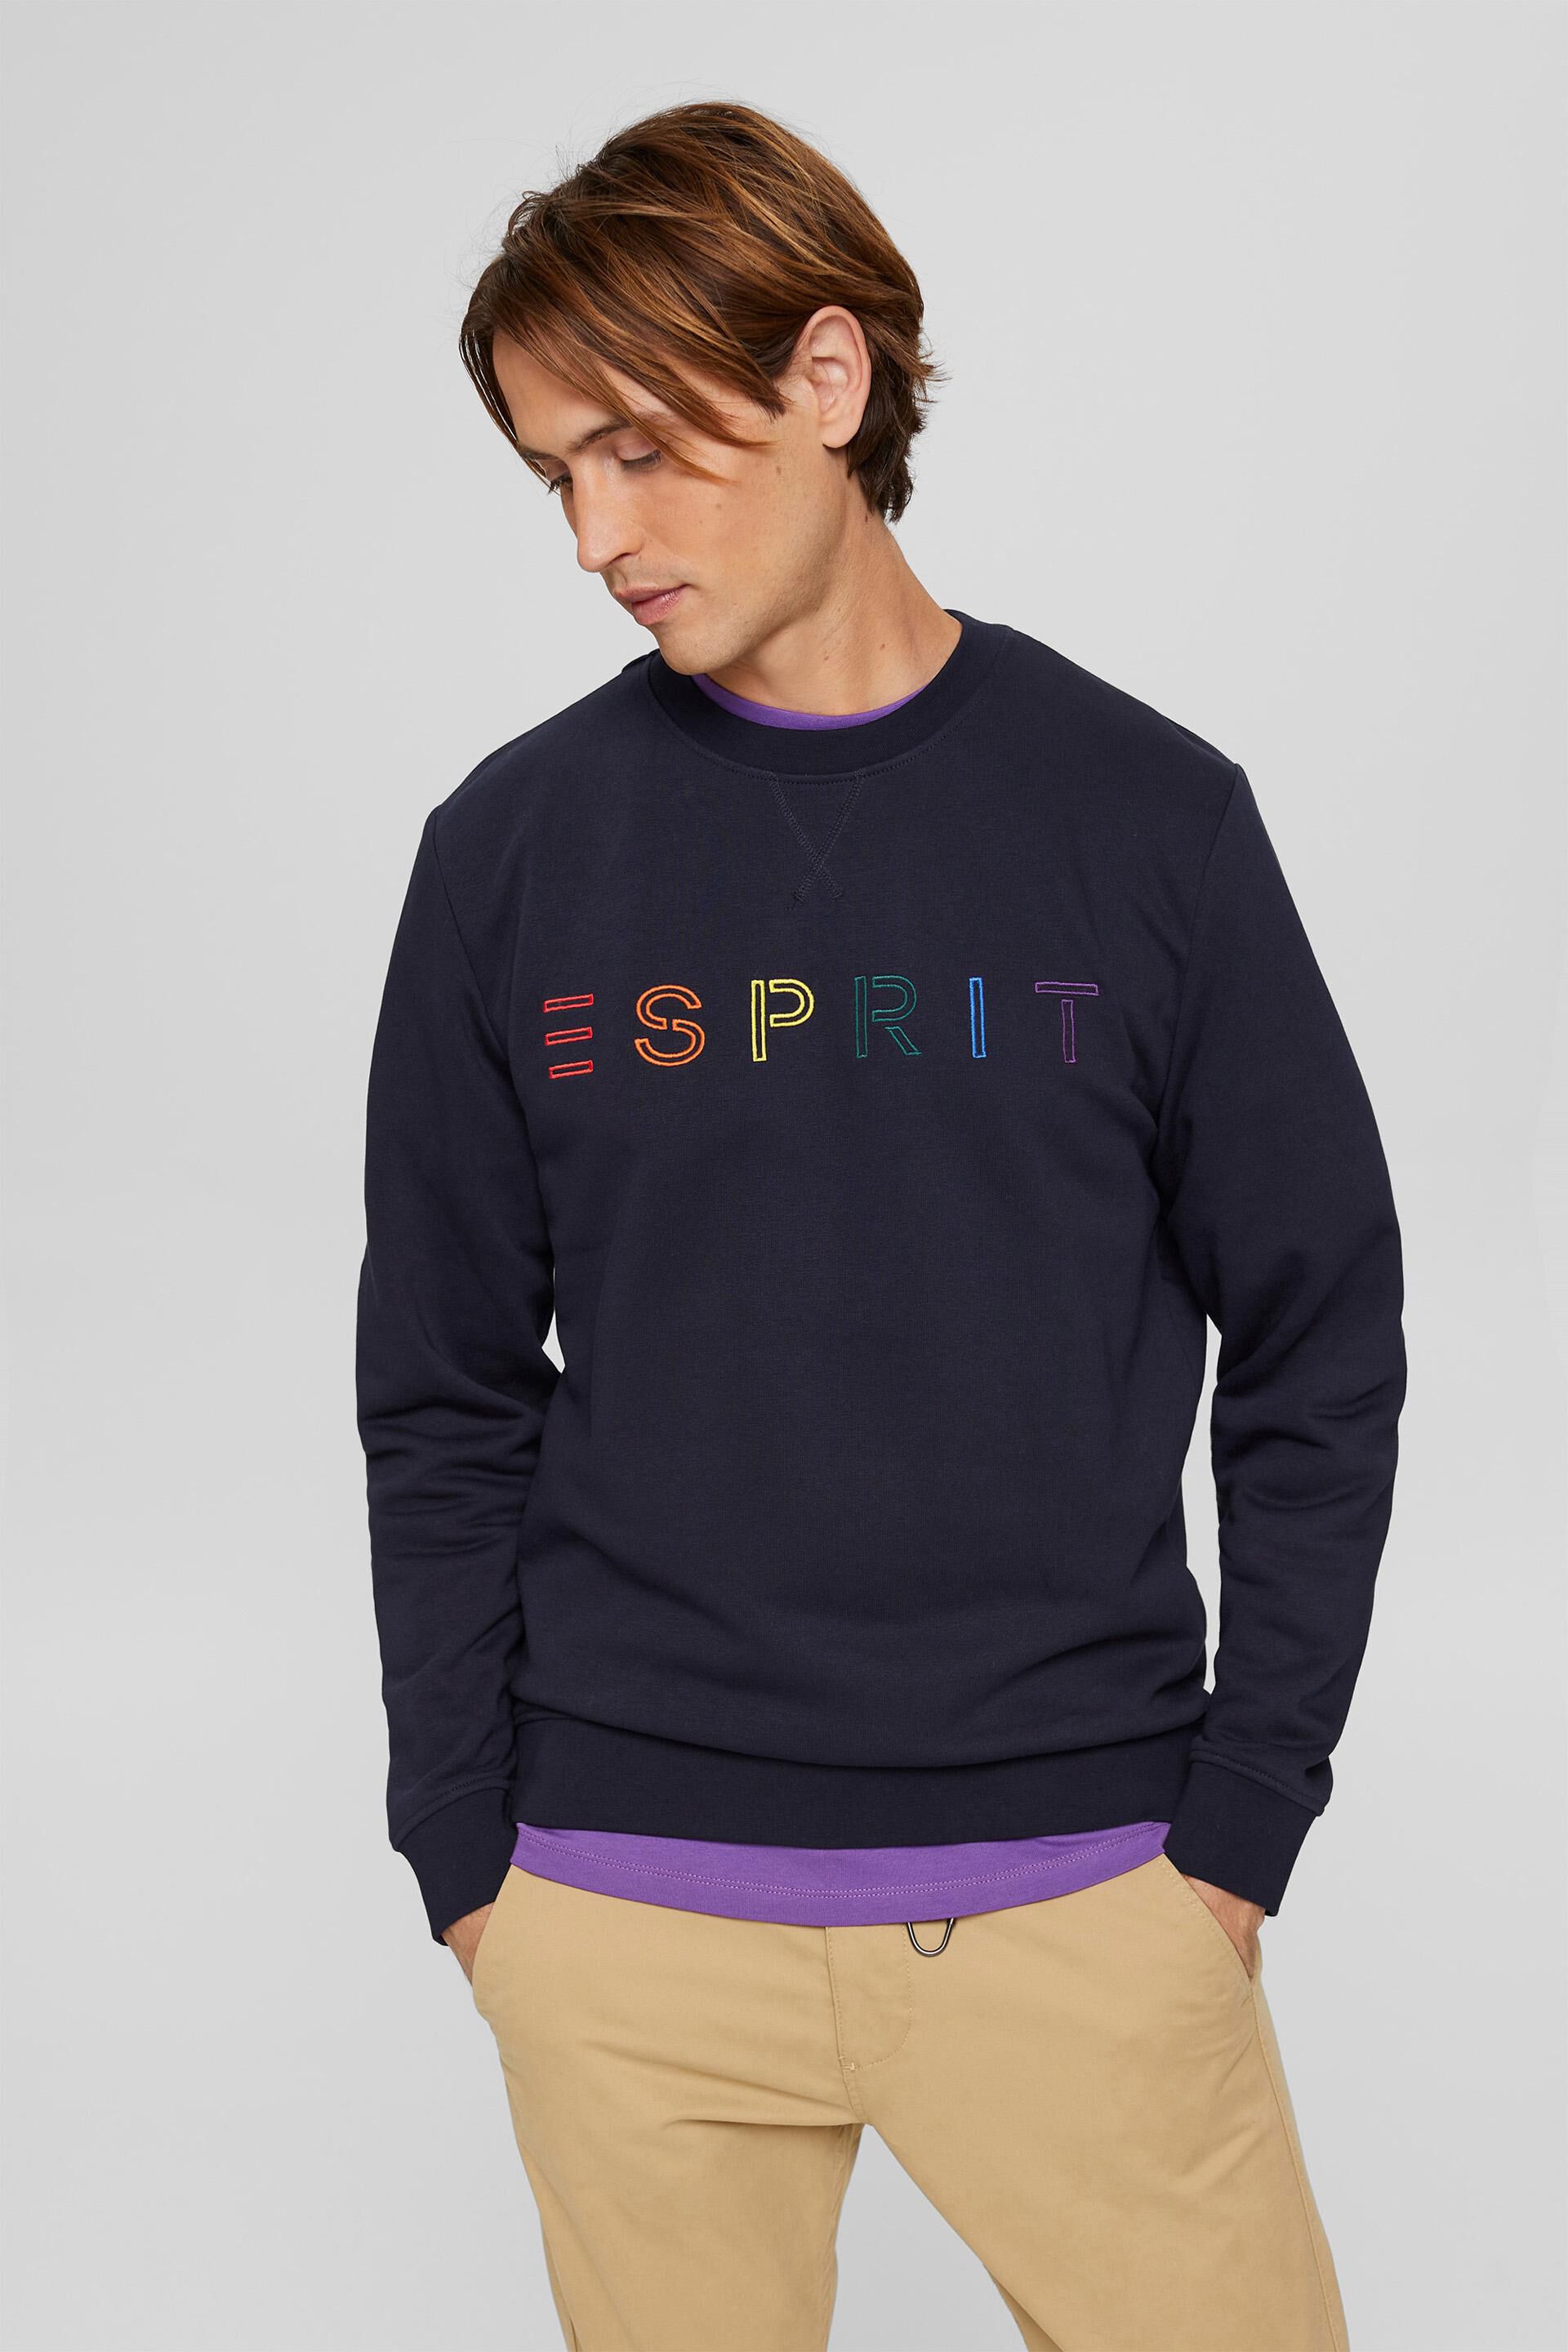 Esprit sweatshirt logo embroidery with Recycled: